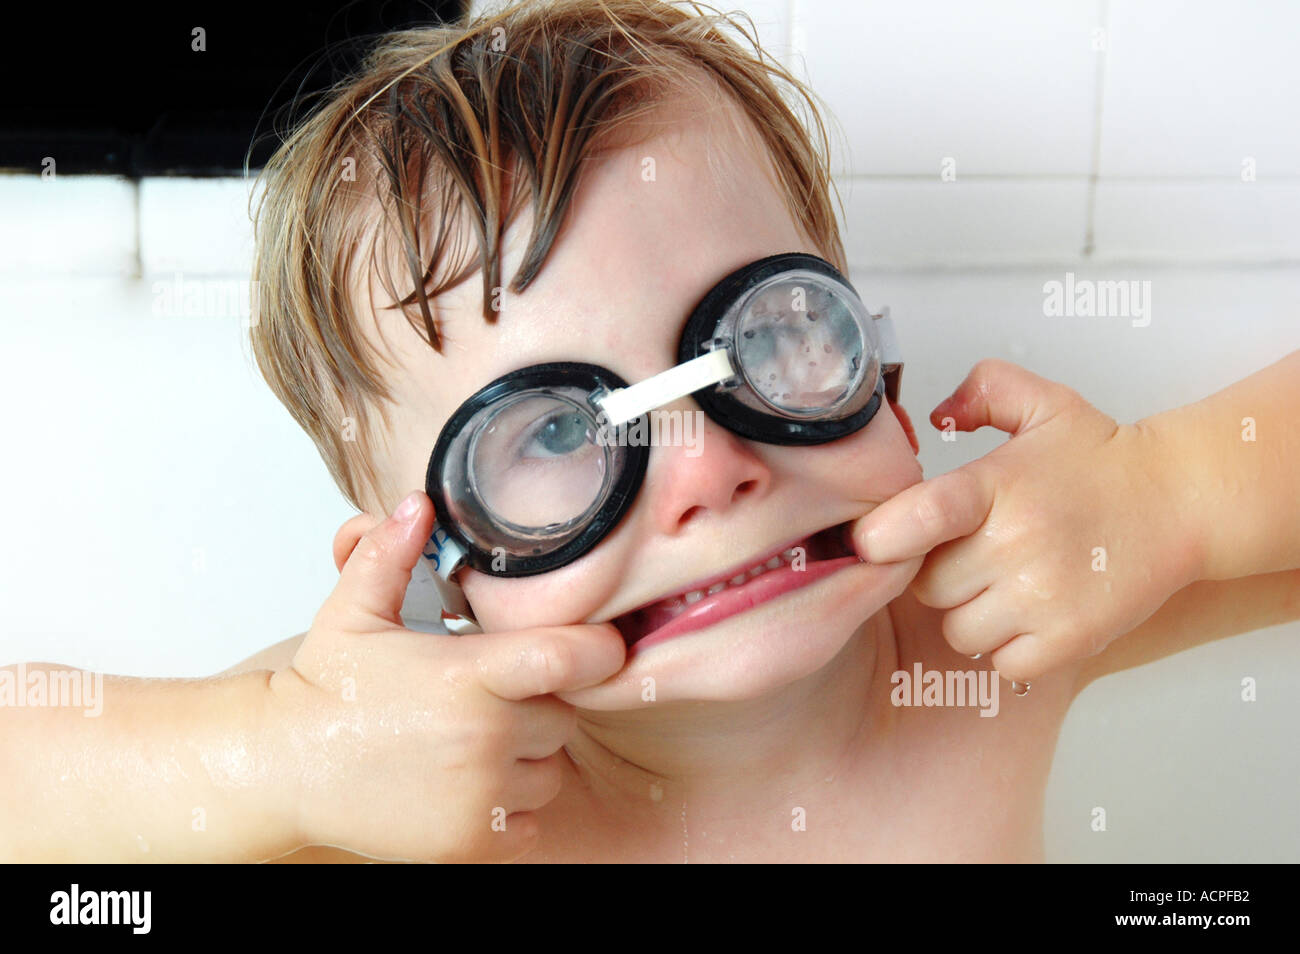 Small boy in tub wearing swimmers goggles making funny face smiling laughing humor humour family life Stock Photo